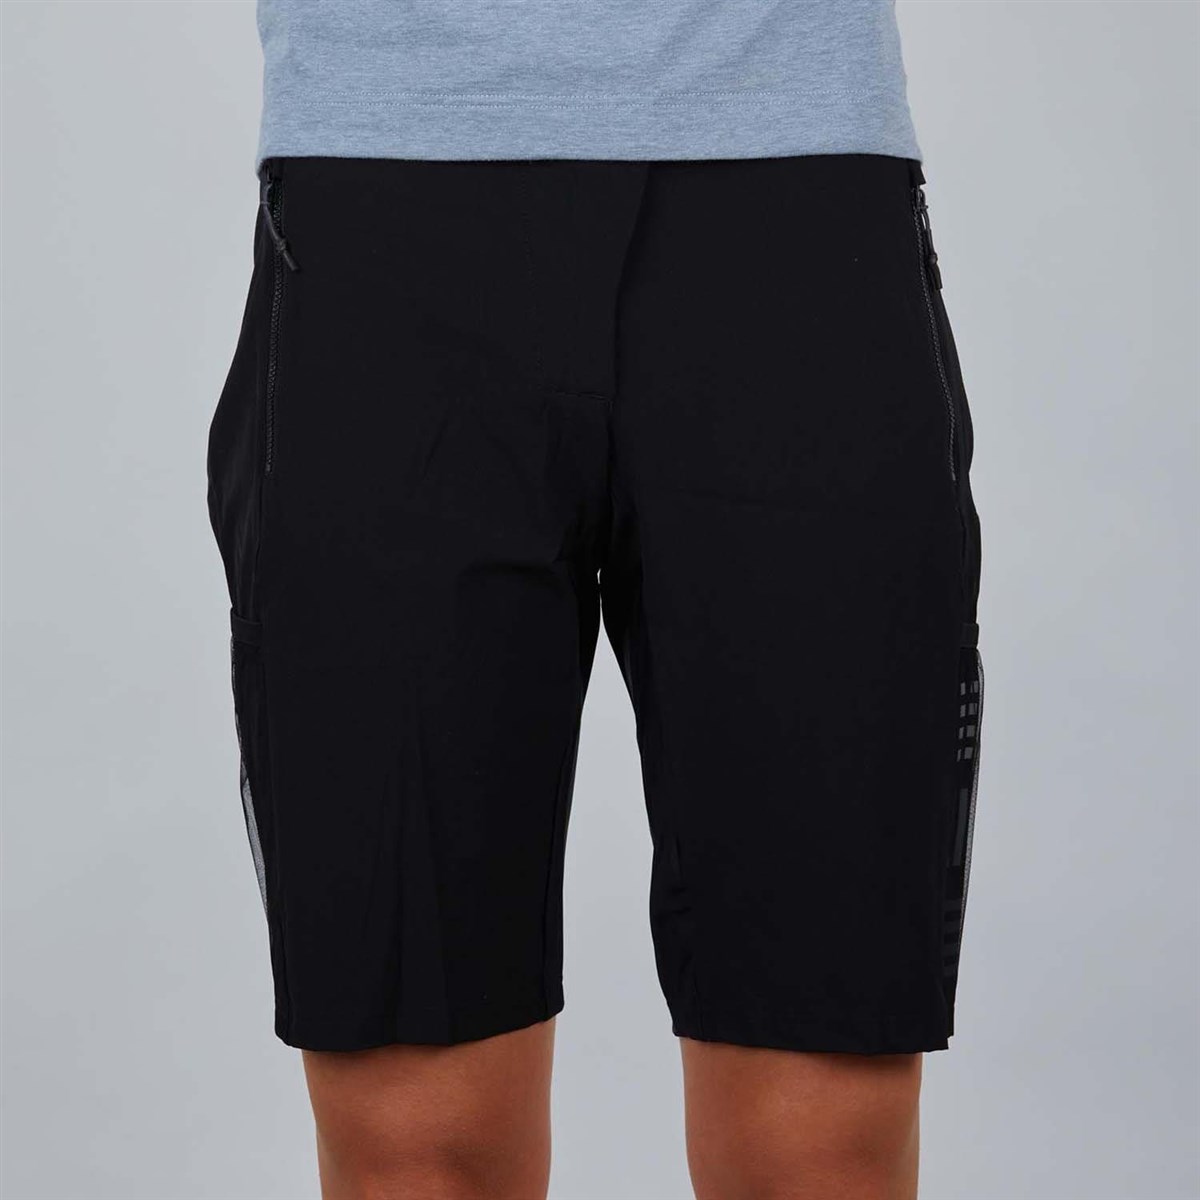 Sportful Supergiara Womens Cycling Over Shorts product image